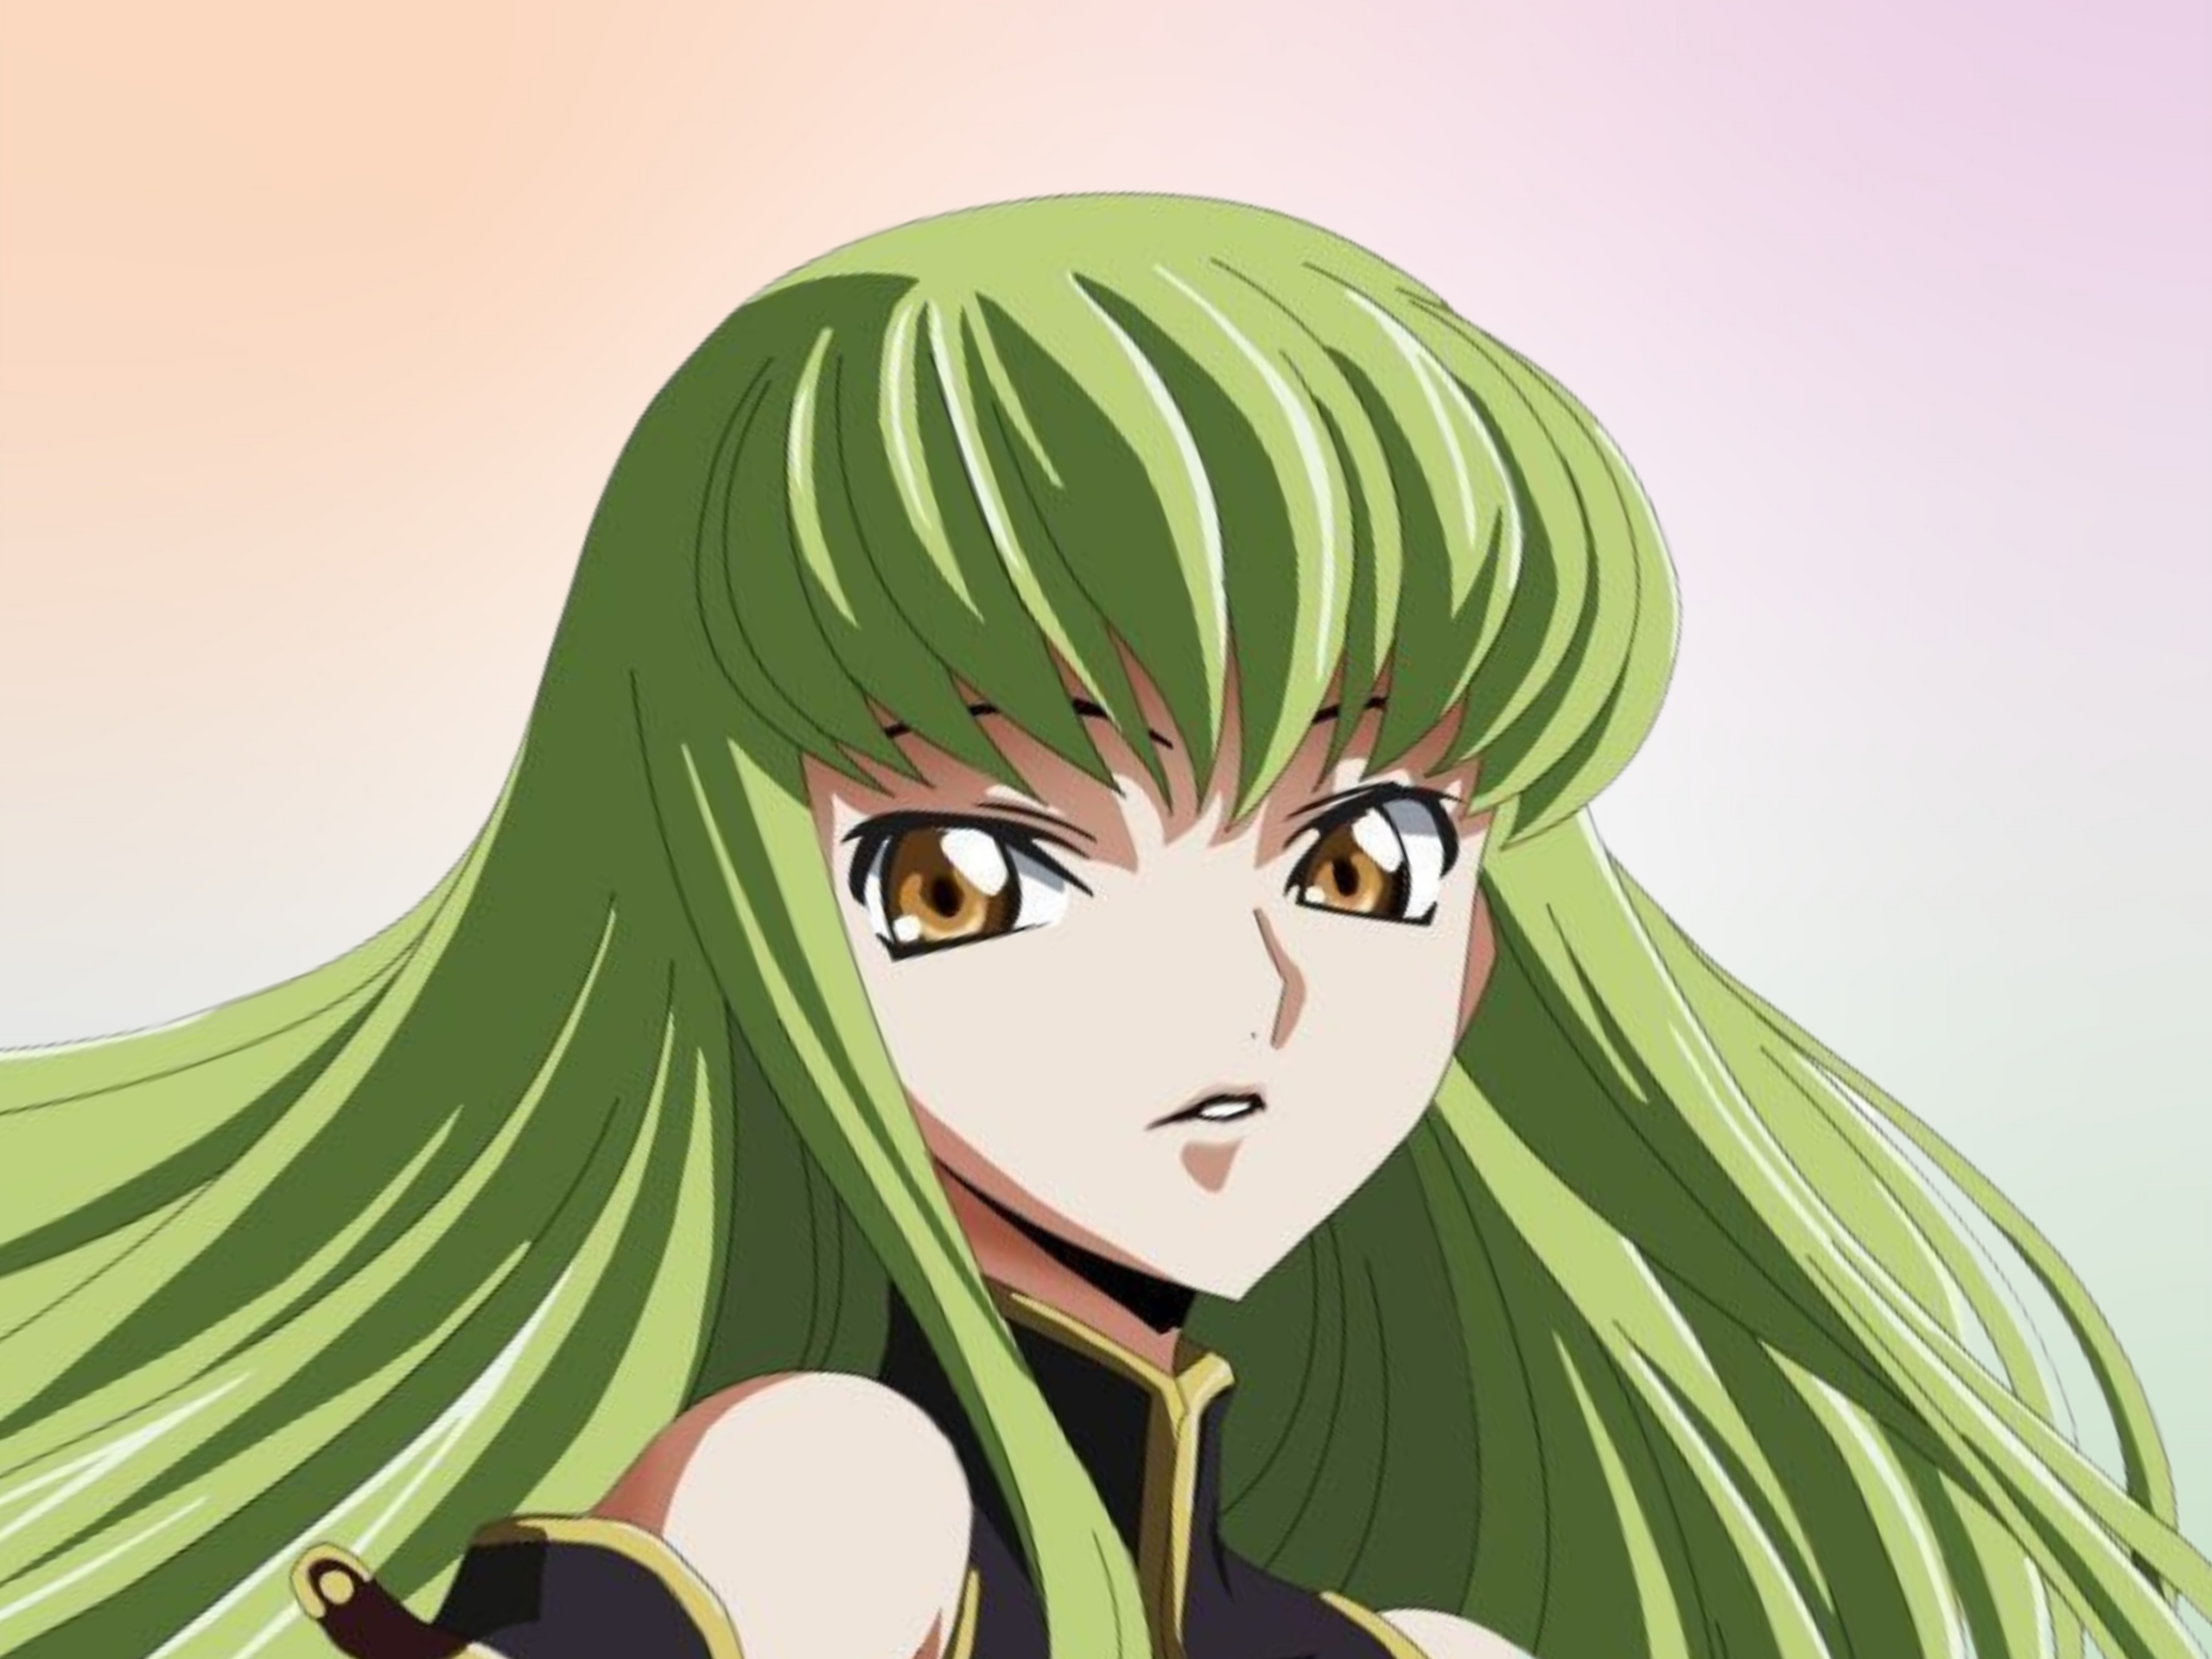 Page 3, HD cc code geass anime wallpapers, animes hd cc - thirstymag.com